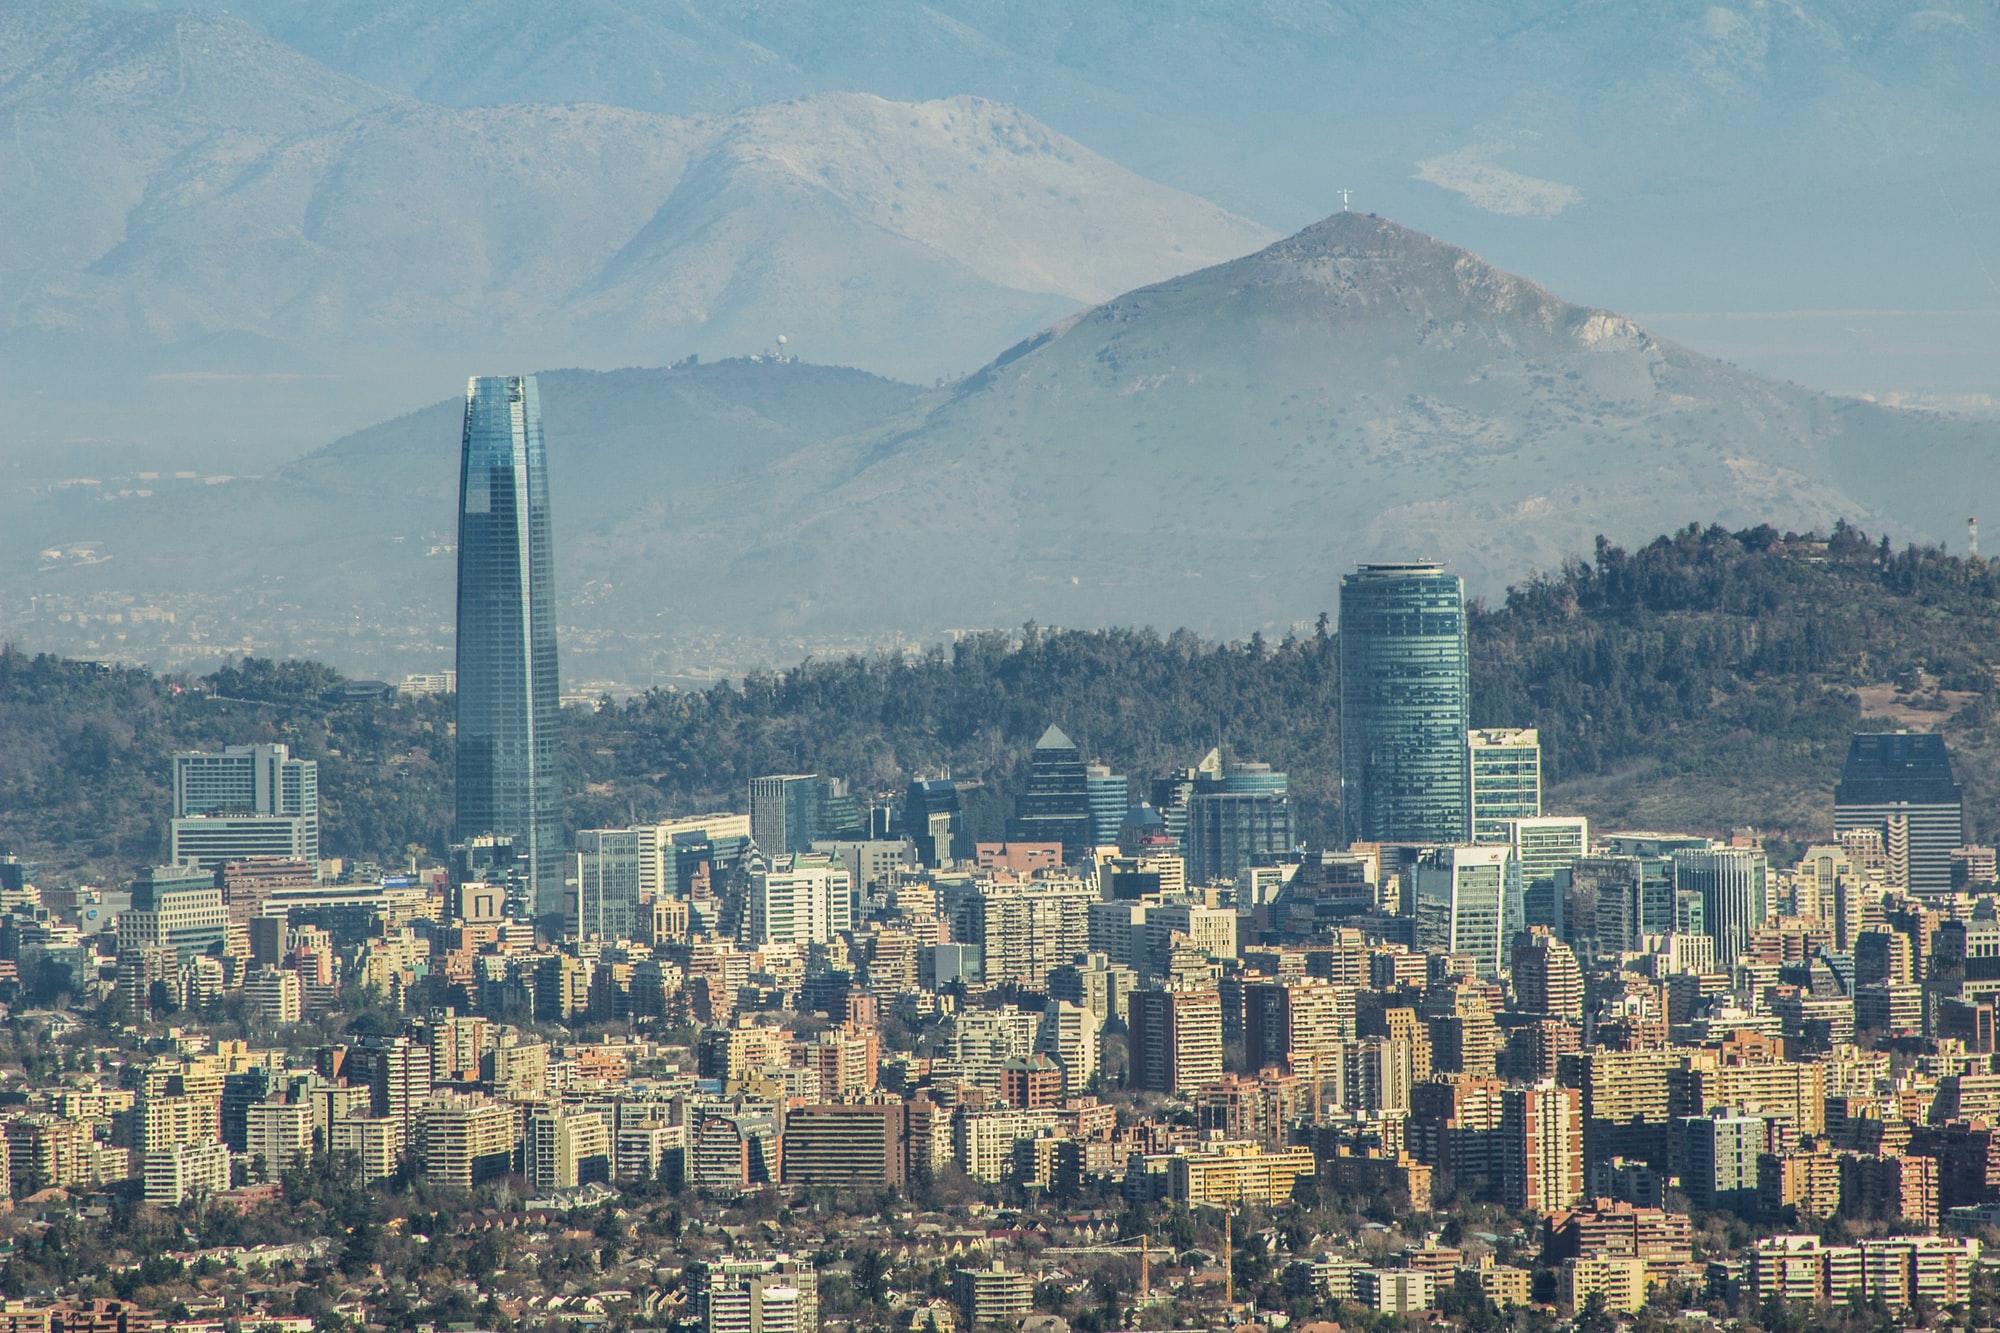 Chile’s economy is expected to grow 1% in November, its first expansion since the coronavirus pandemic struck in March, a central bank poll of analysts showed on Thursday, December 10th.